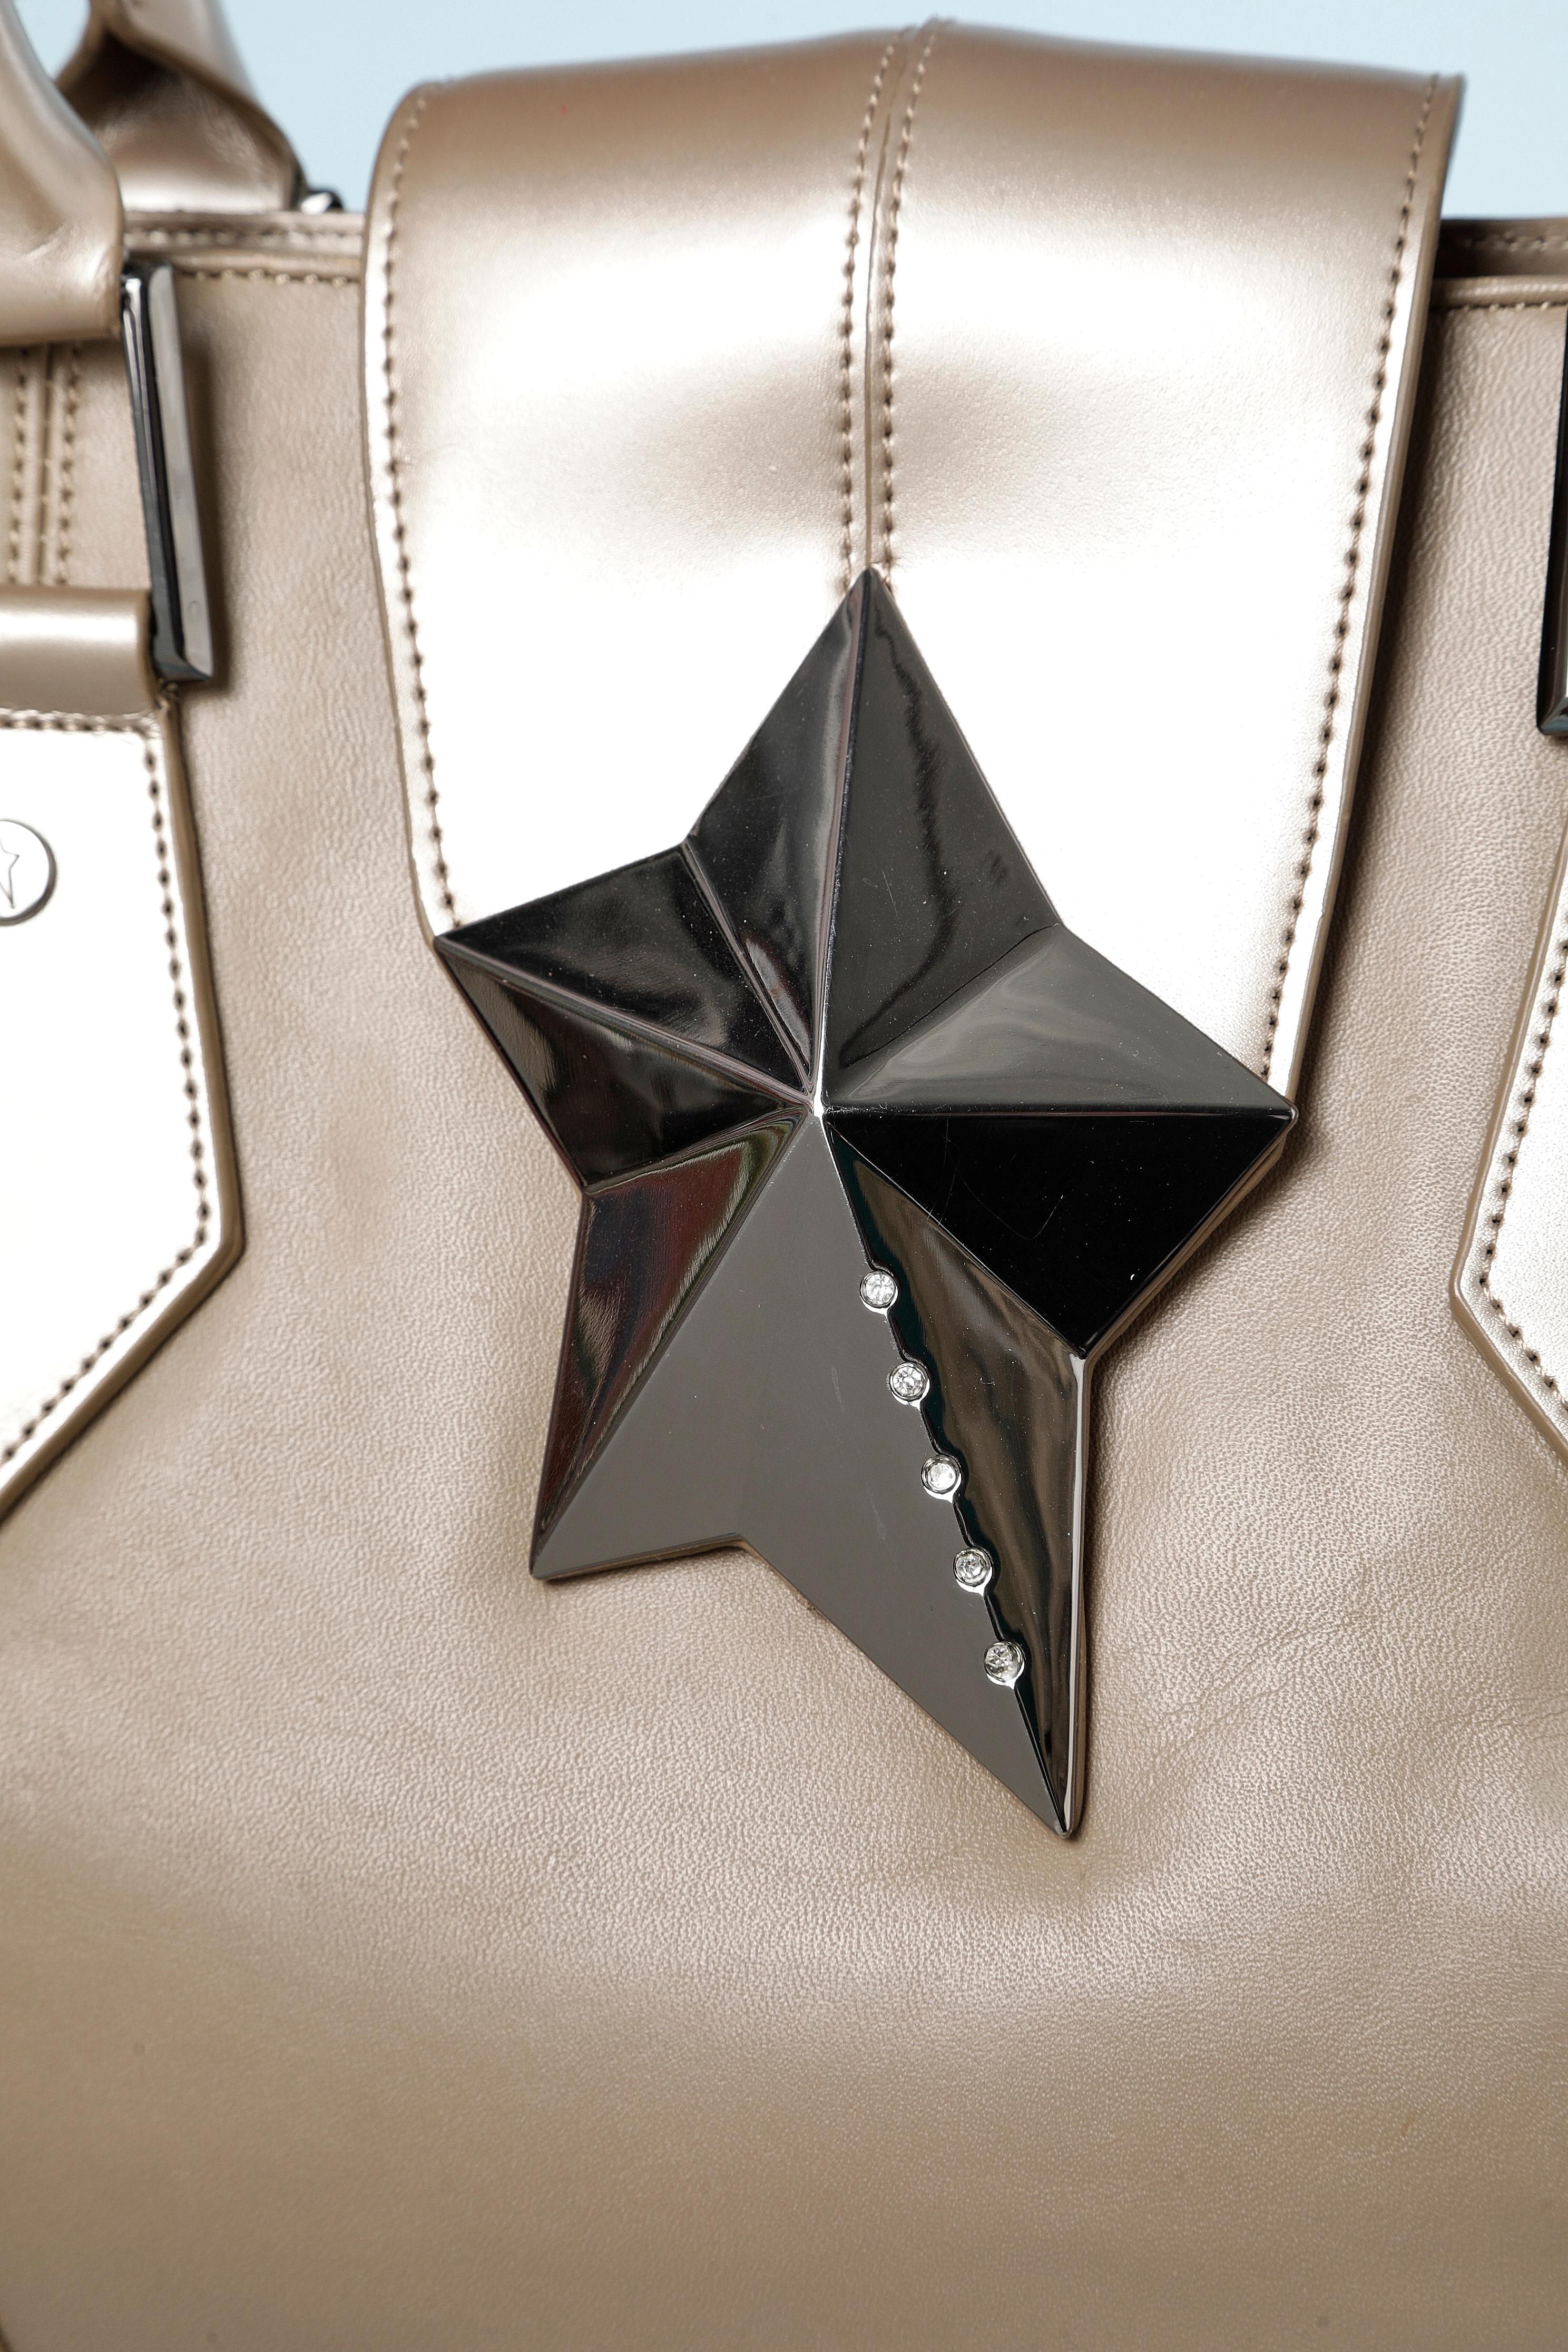 Zenith Ellipse shoulder bag in beige leather and metal star. 
Flat inside pocket with zip. Fabric lining with star pattern
Measures: 
- height= 25 cm
- width= 36 cm
- depth= 28 cm 
Metal stud to protect the bag underneath.
Numbered: MT16170710
